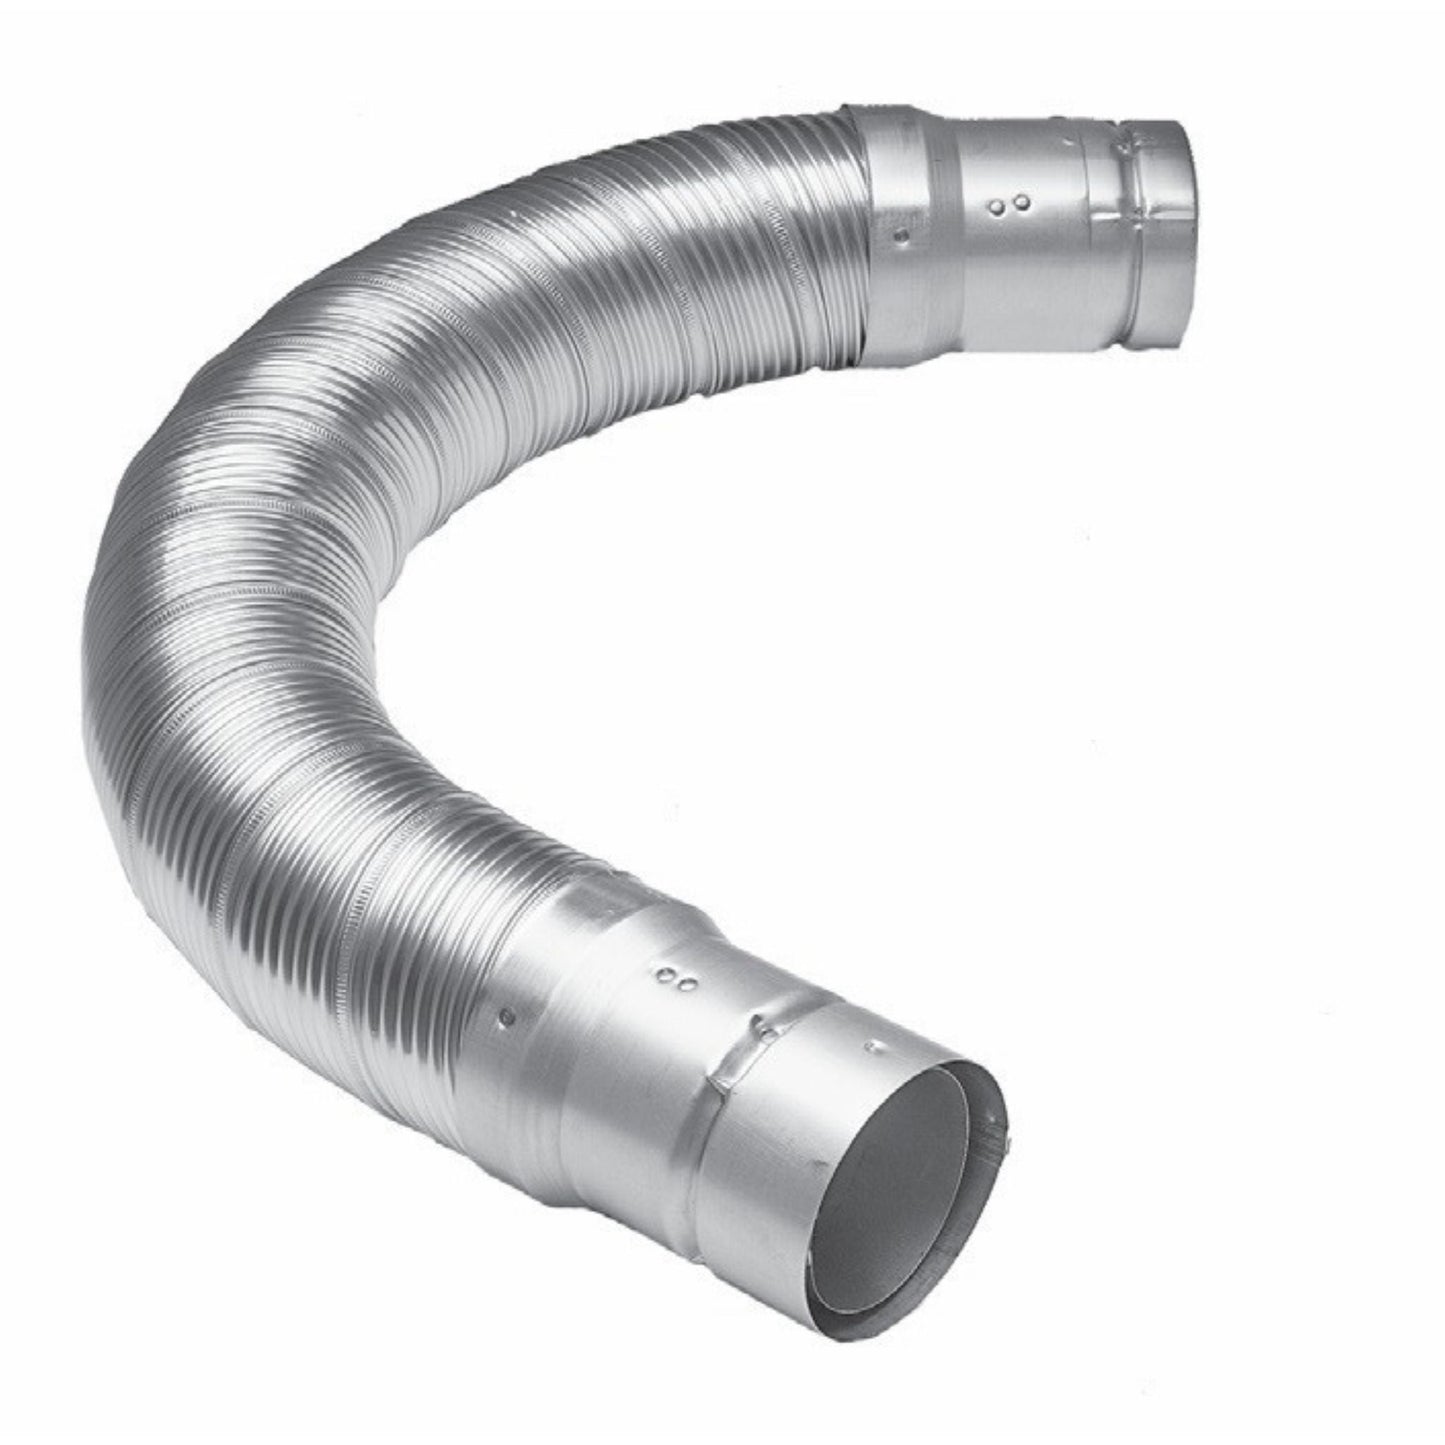 DuraVent DuraConnect II B-Vent 4" x 36" Flexible Double-Wall Gas Vent Connector